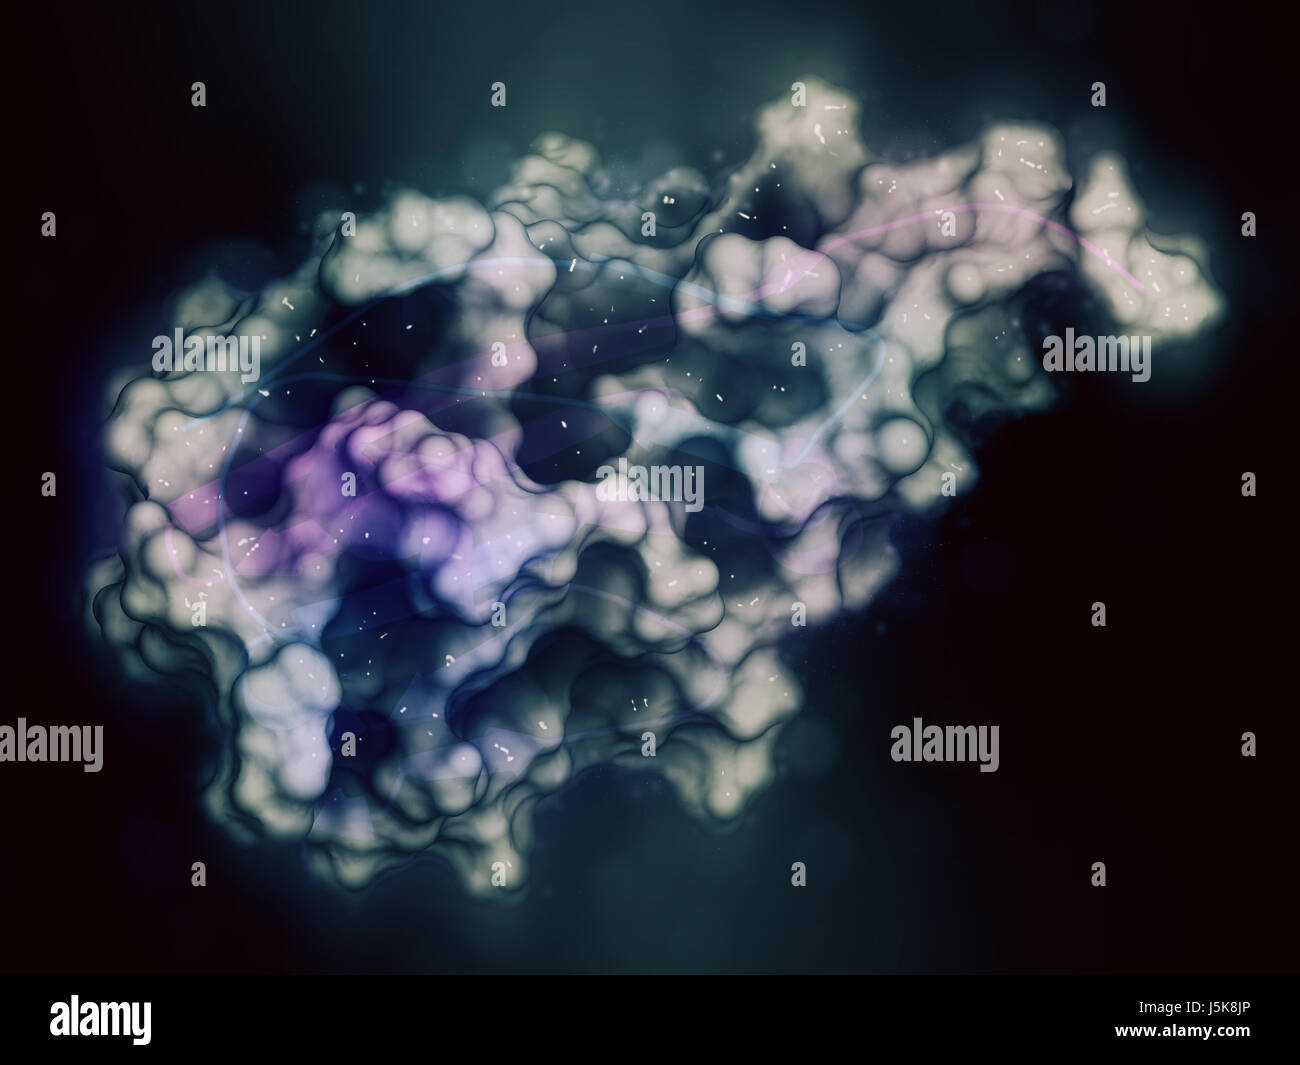 CD47 (integrin associated protein, extracellular domain) protein. Often present on cancer cells and a potential antitumoral drug target. 3D rendering. Stock Photo